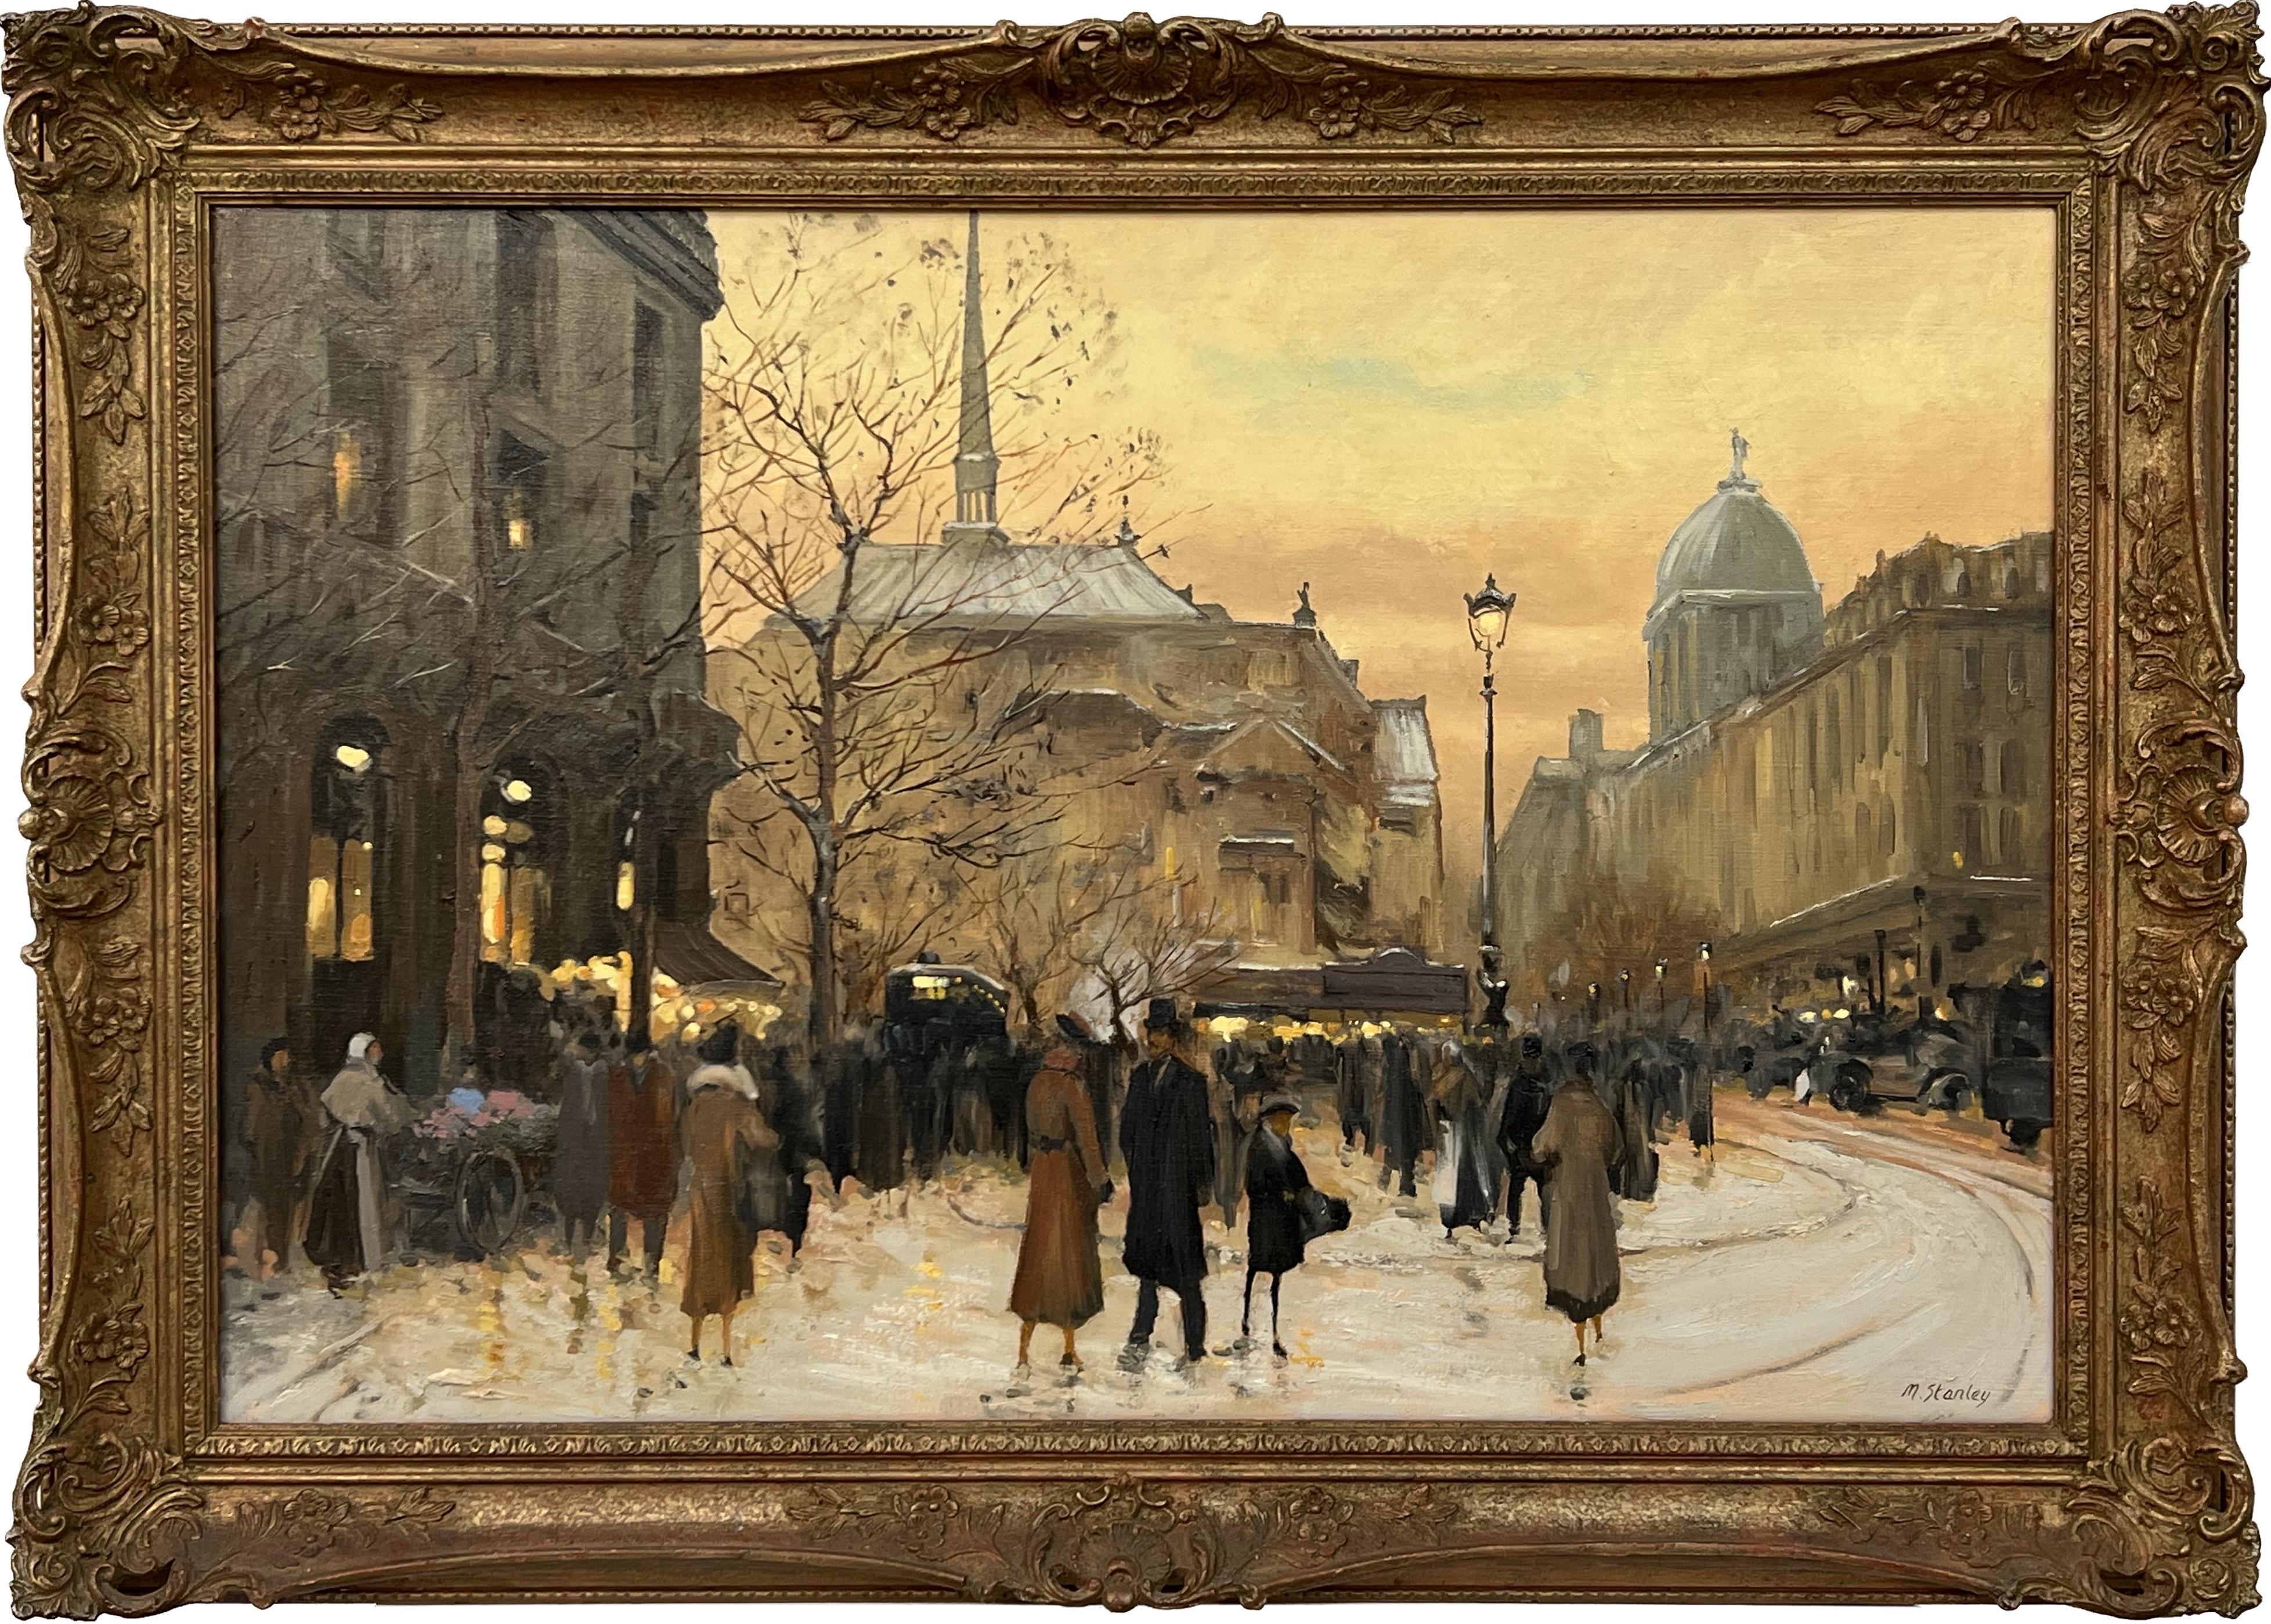 Painting of Figures at a Parisian Market at Wintertime in the Late 19th Century